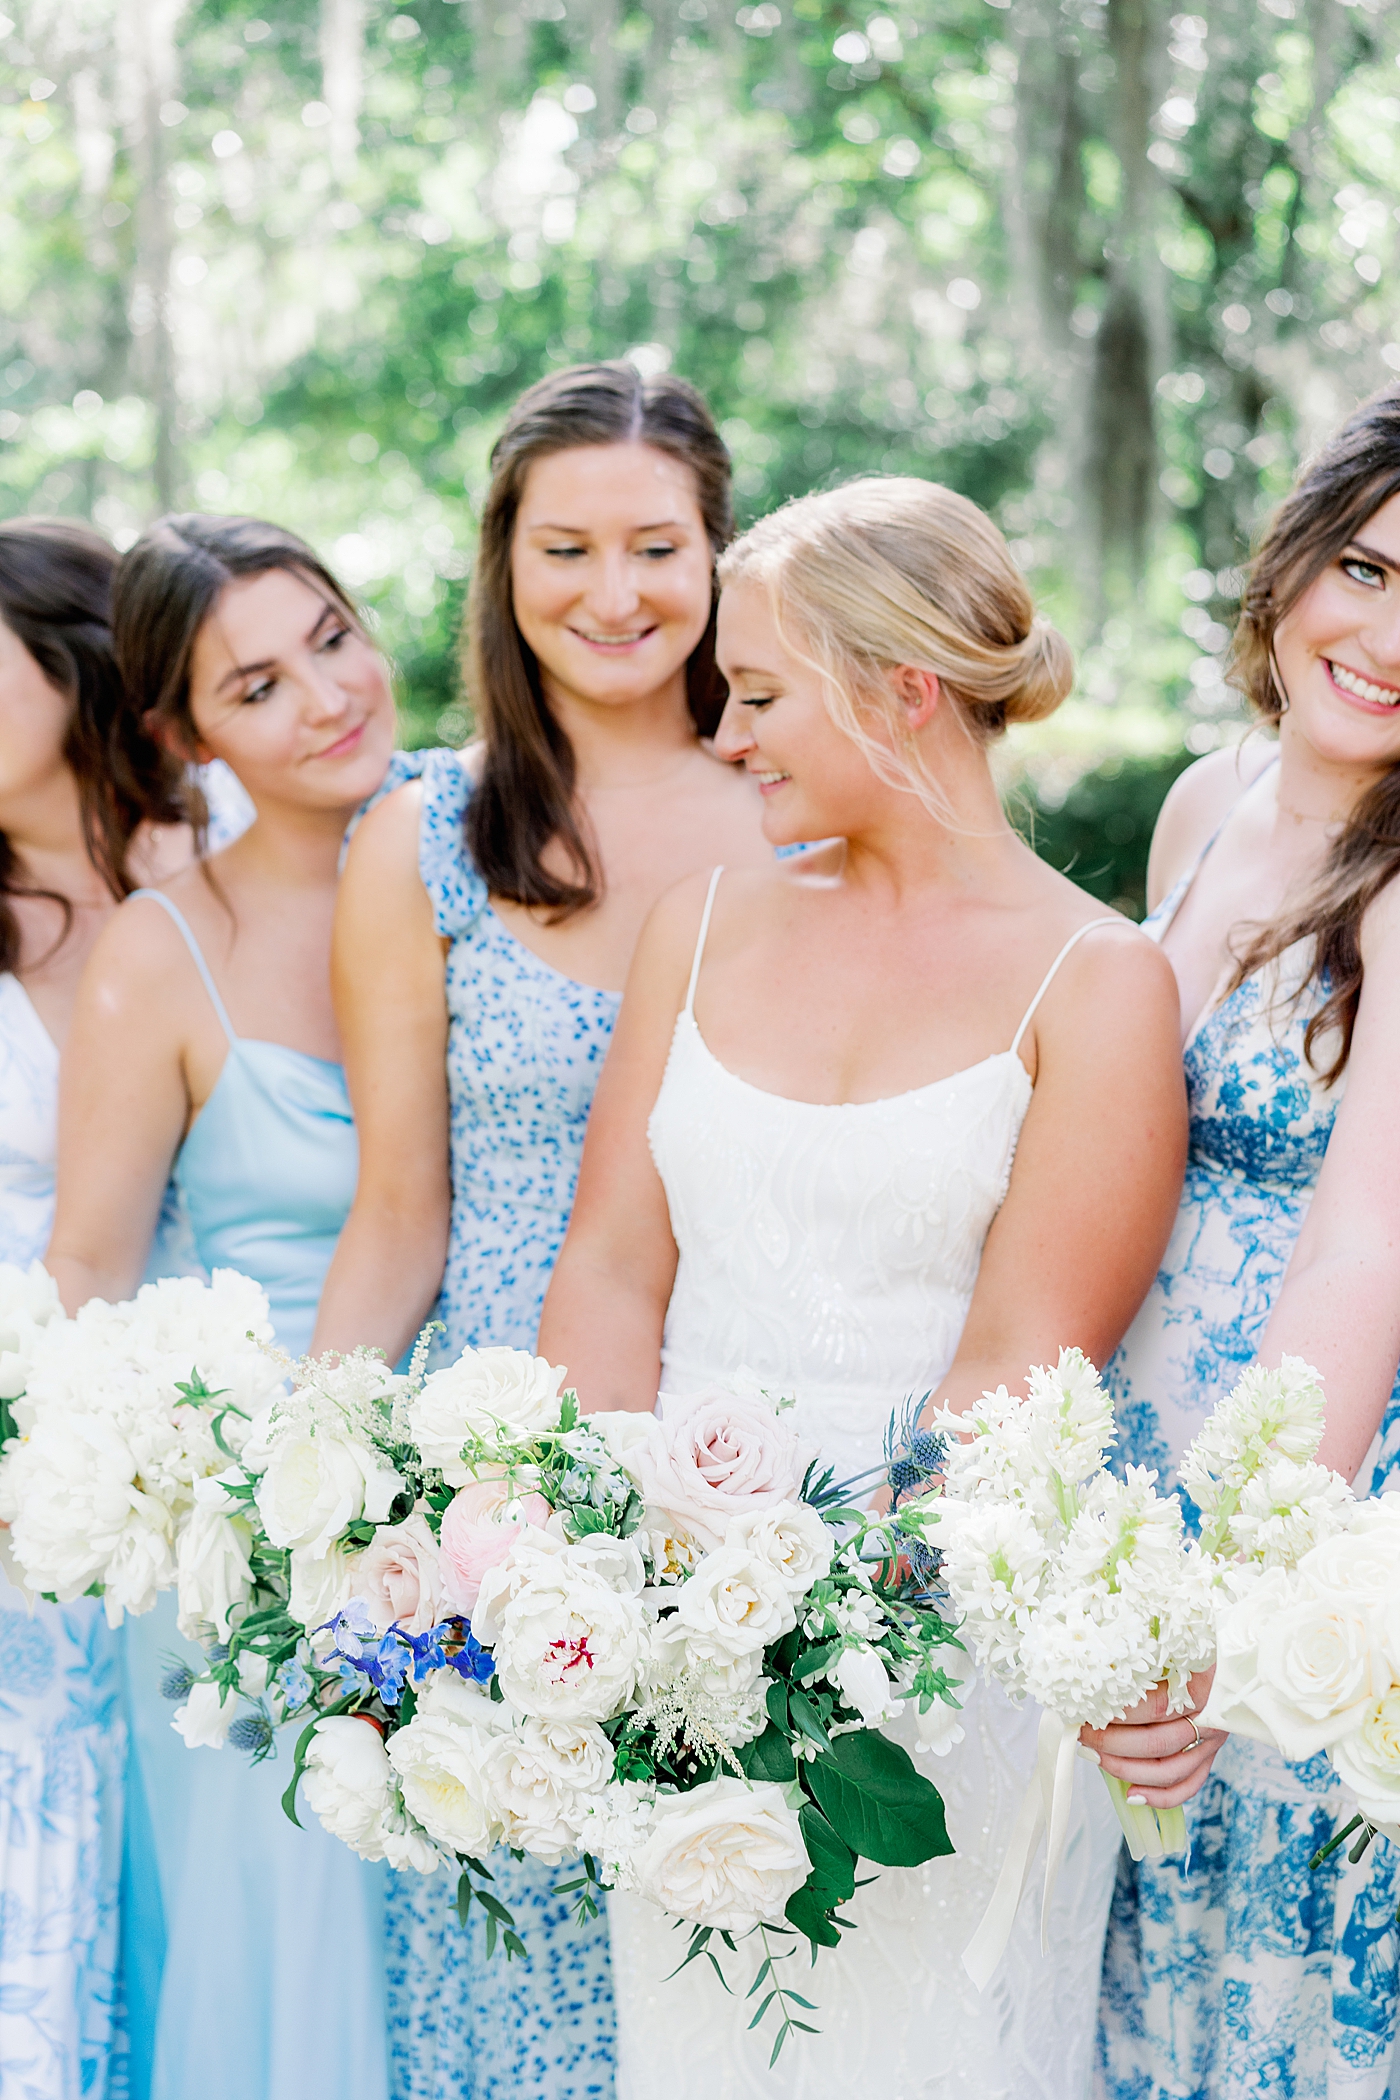 Bridal party bouquets during Elegant Grandmillenial Charleston Wedding | Images by Annie Laura Photography